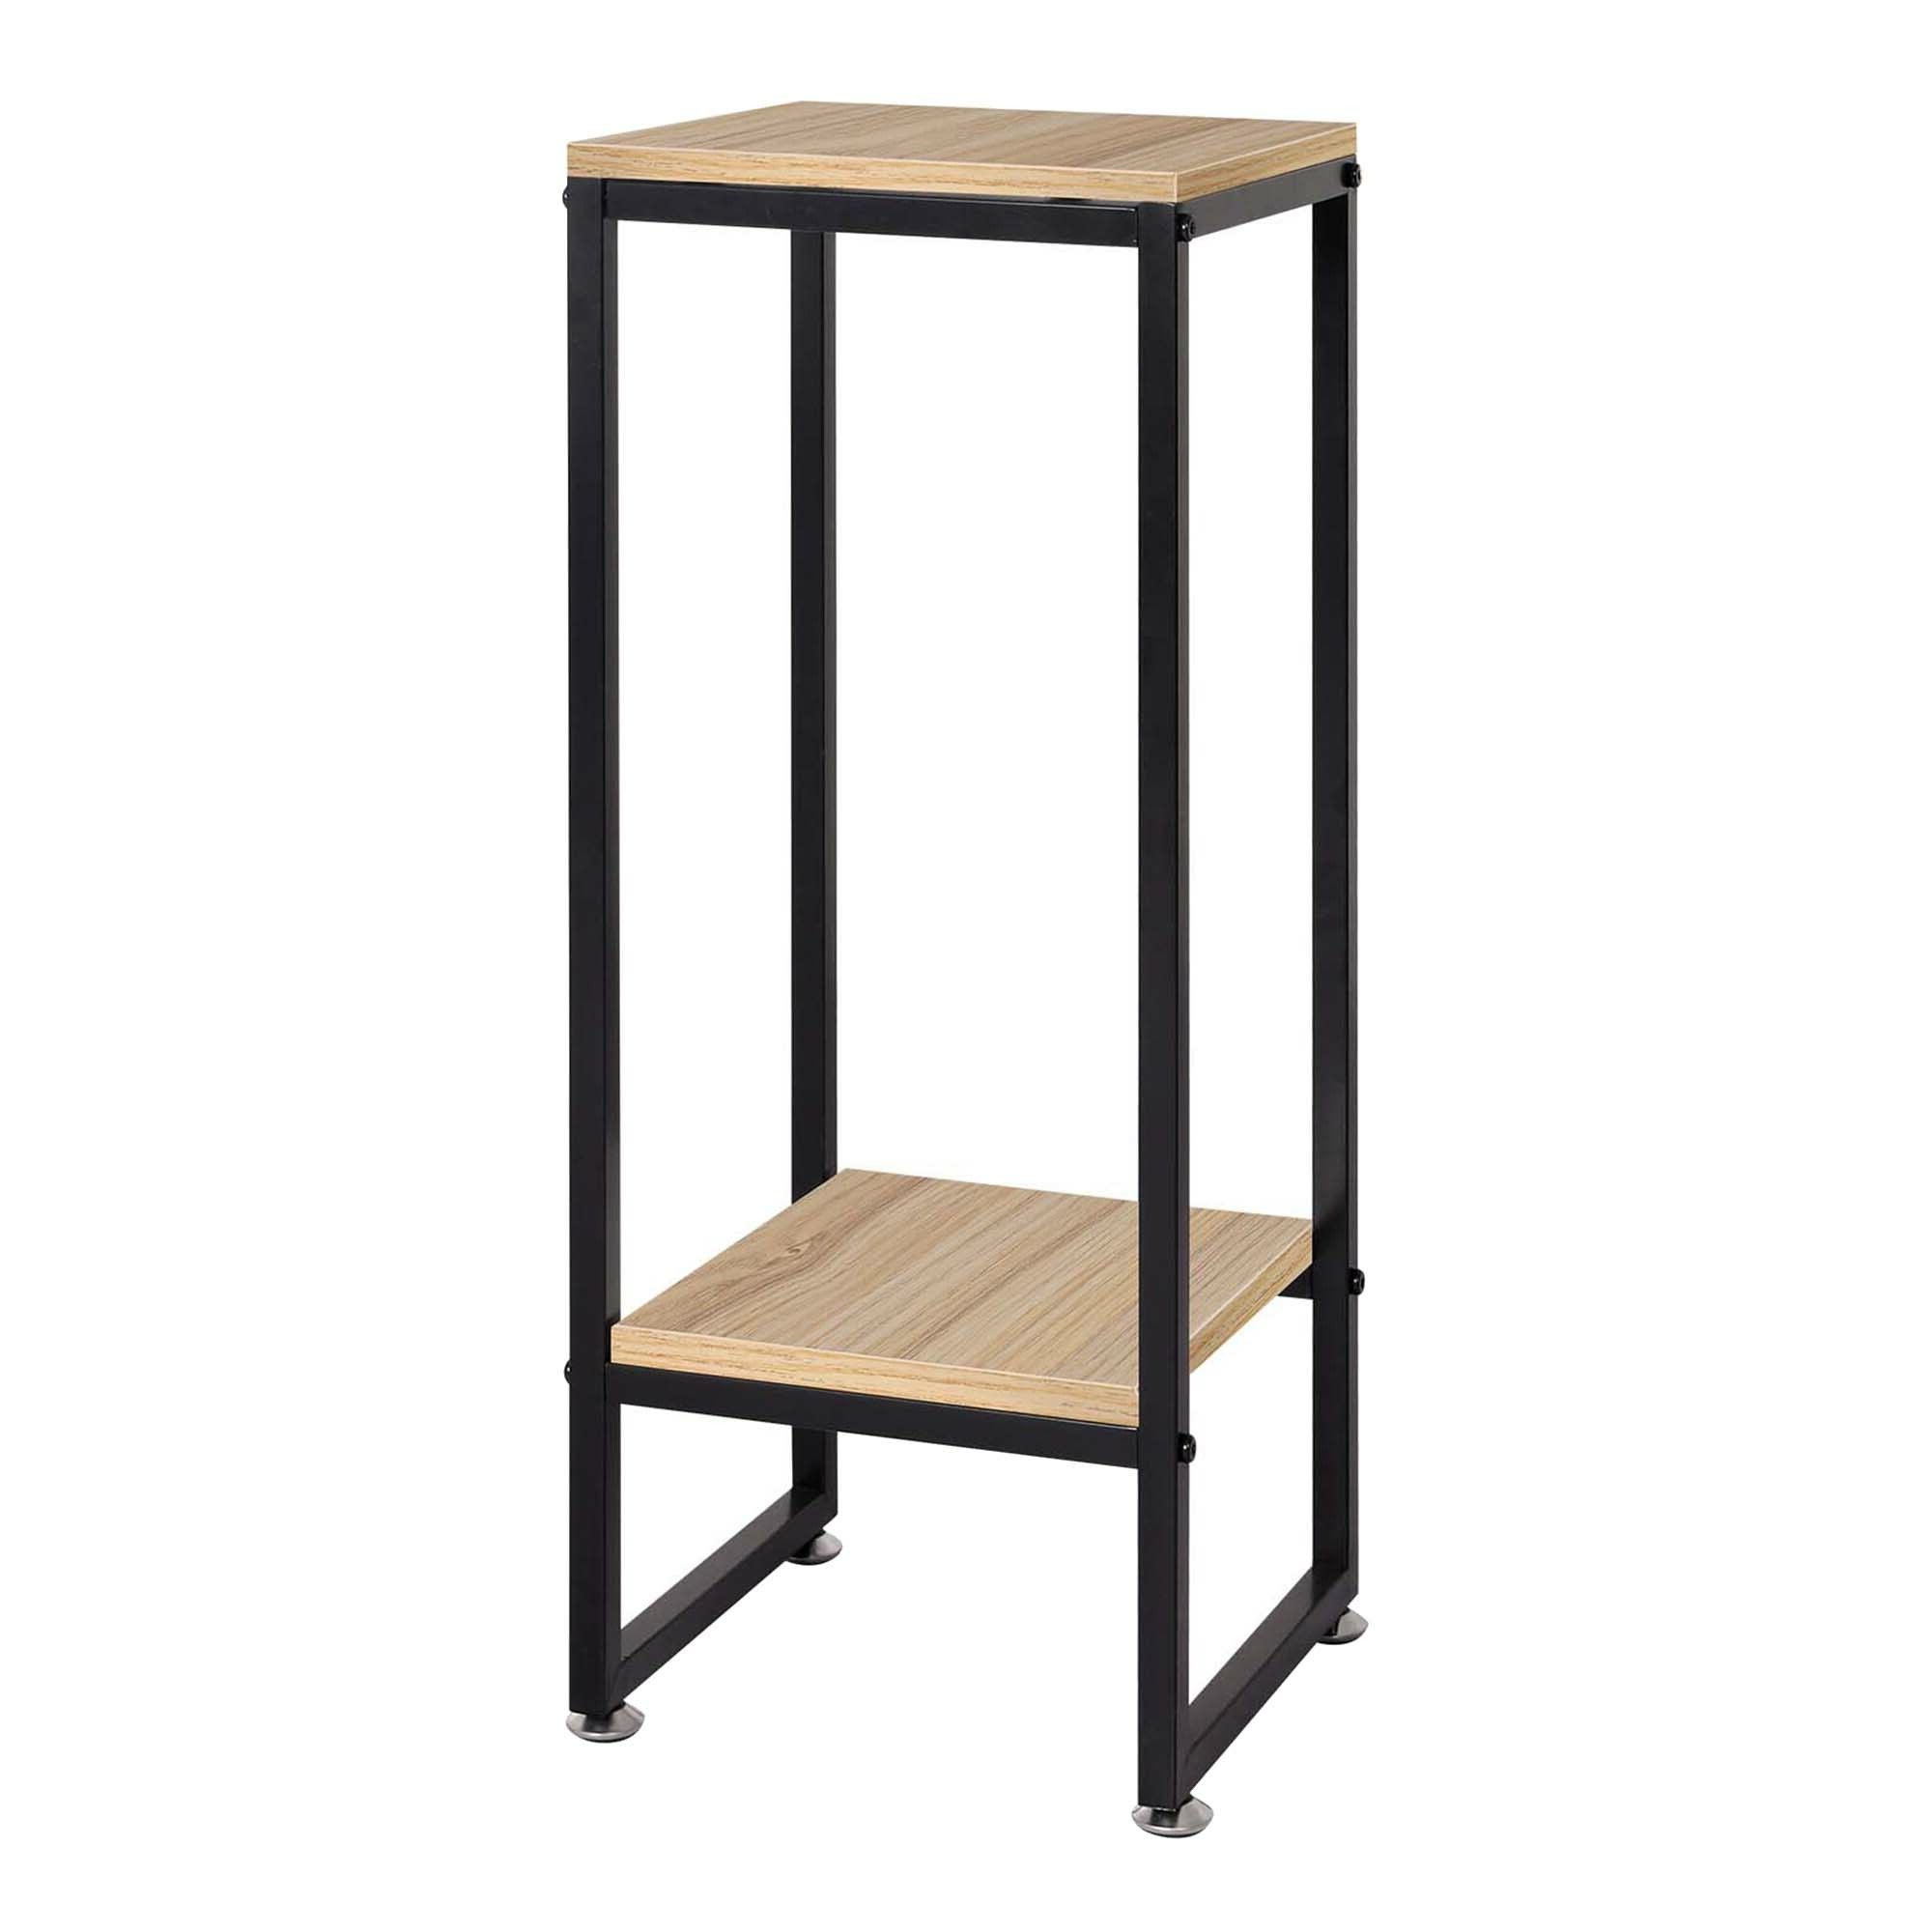 Preferred Oakleigh Home Lucille 2 Tier Plant Stand (View 11 of 15)